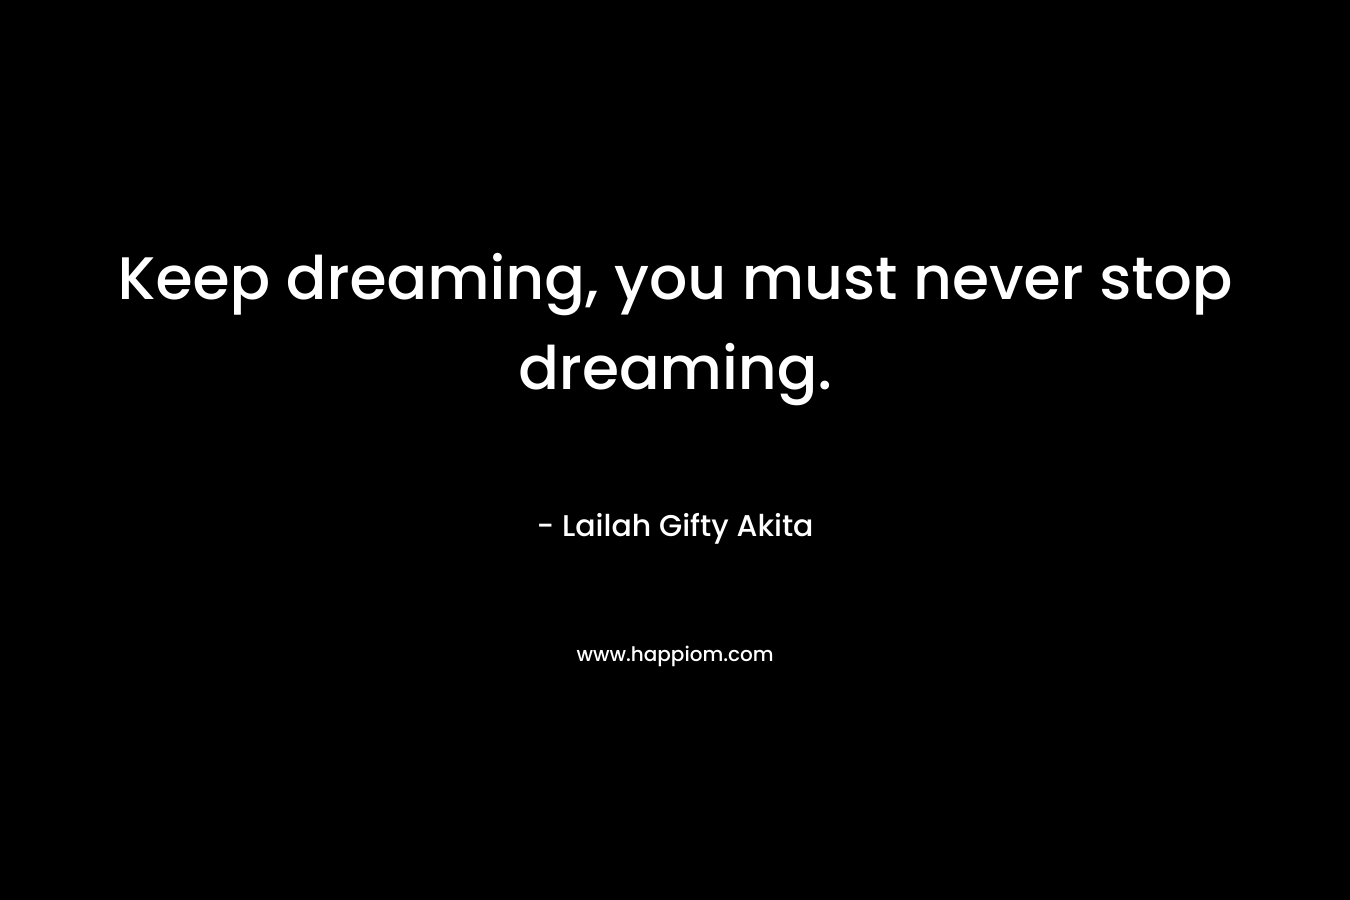 Keep dreaming, you must never stop dreaming. – Lailah Gifty Akita